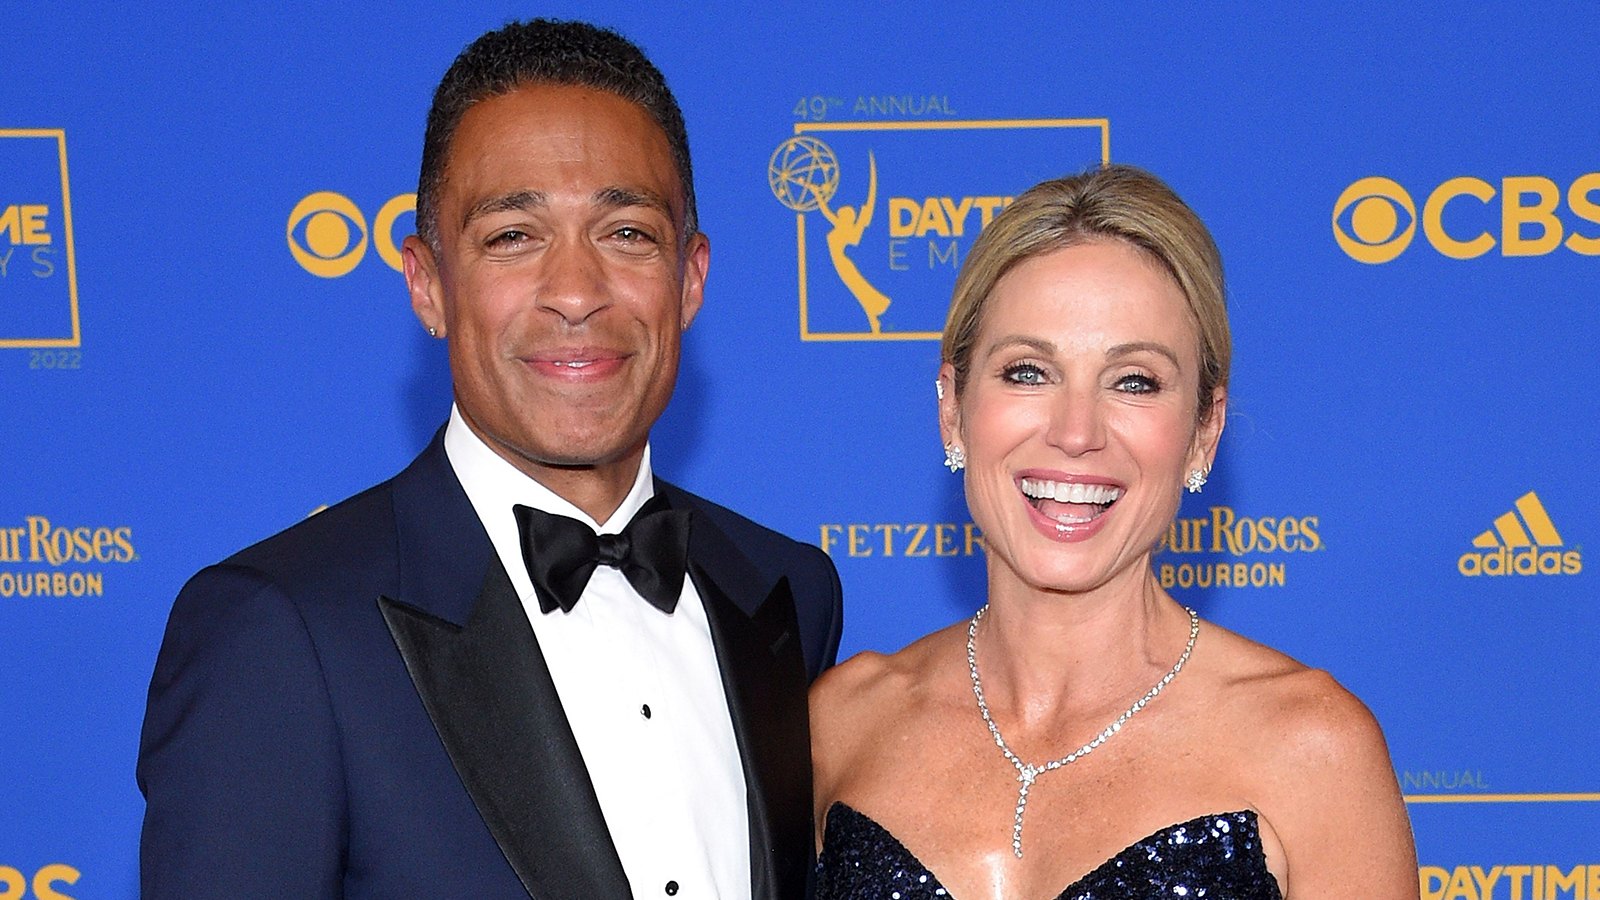 GMA3's Amy Robach Reactivates Her Instagram Account After Heading to Miami With T.J. Holmes